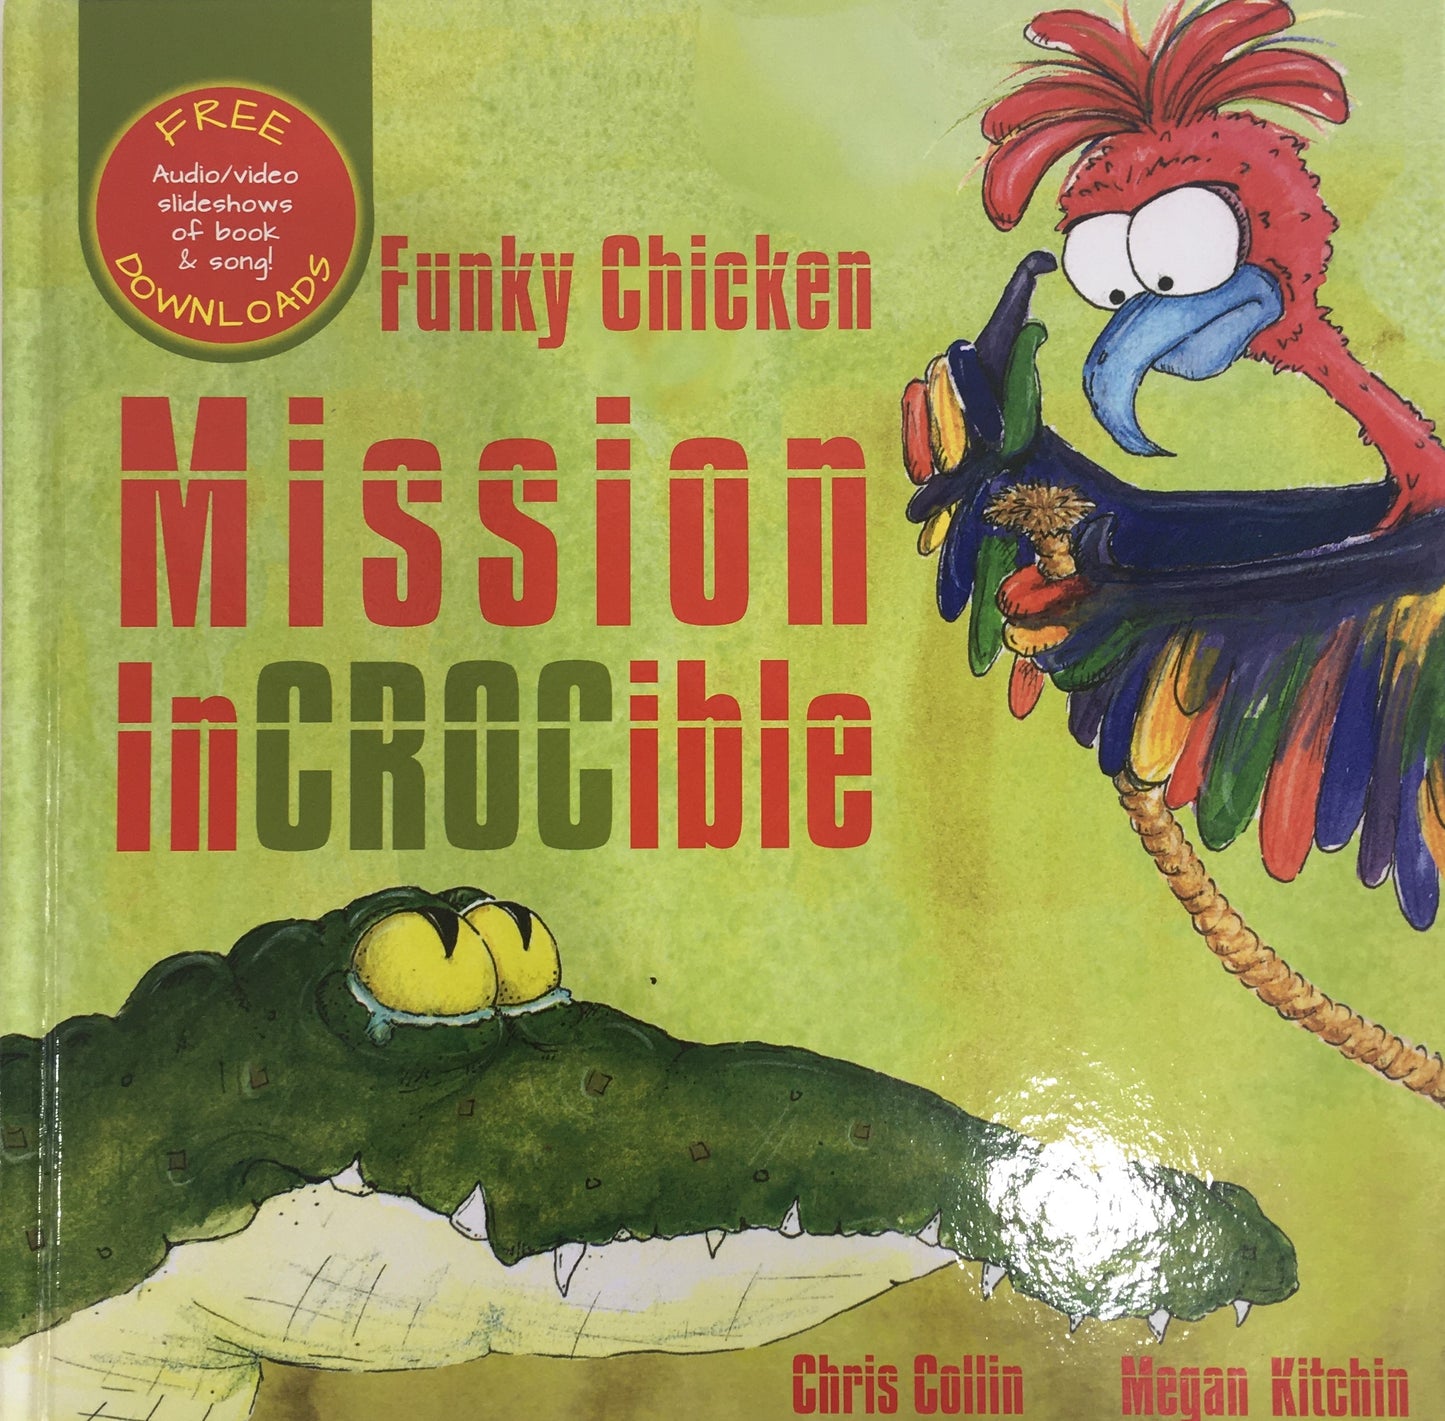 Funky Chicken - Mission inCROCible